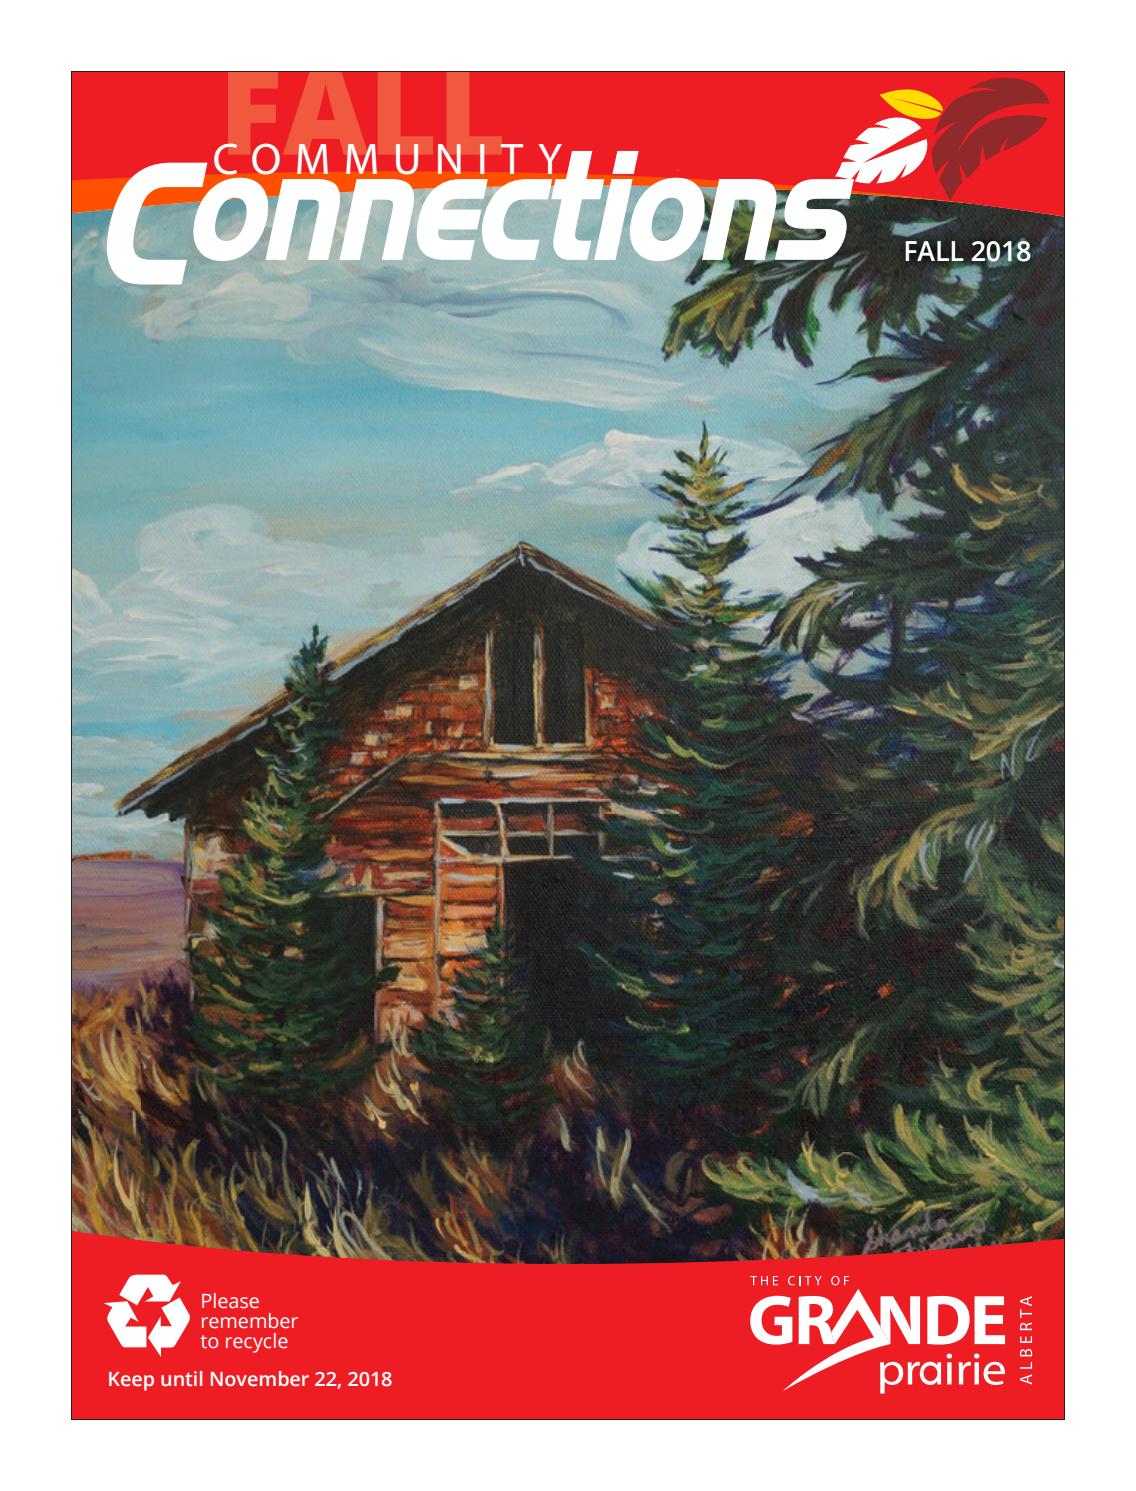 Soapstone Fireplace Beautiful Munity Connections Fall 2018 Edition by City Of Grande